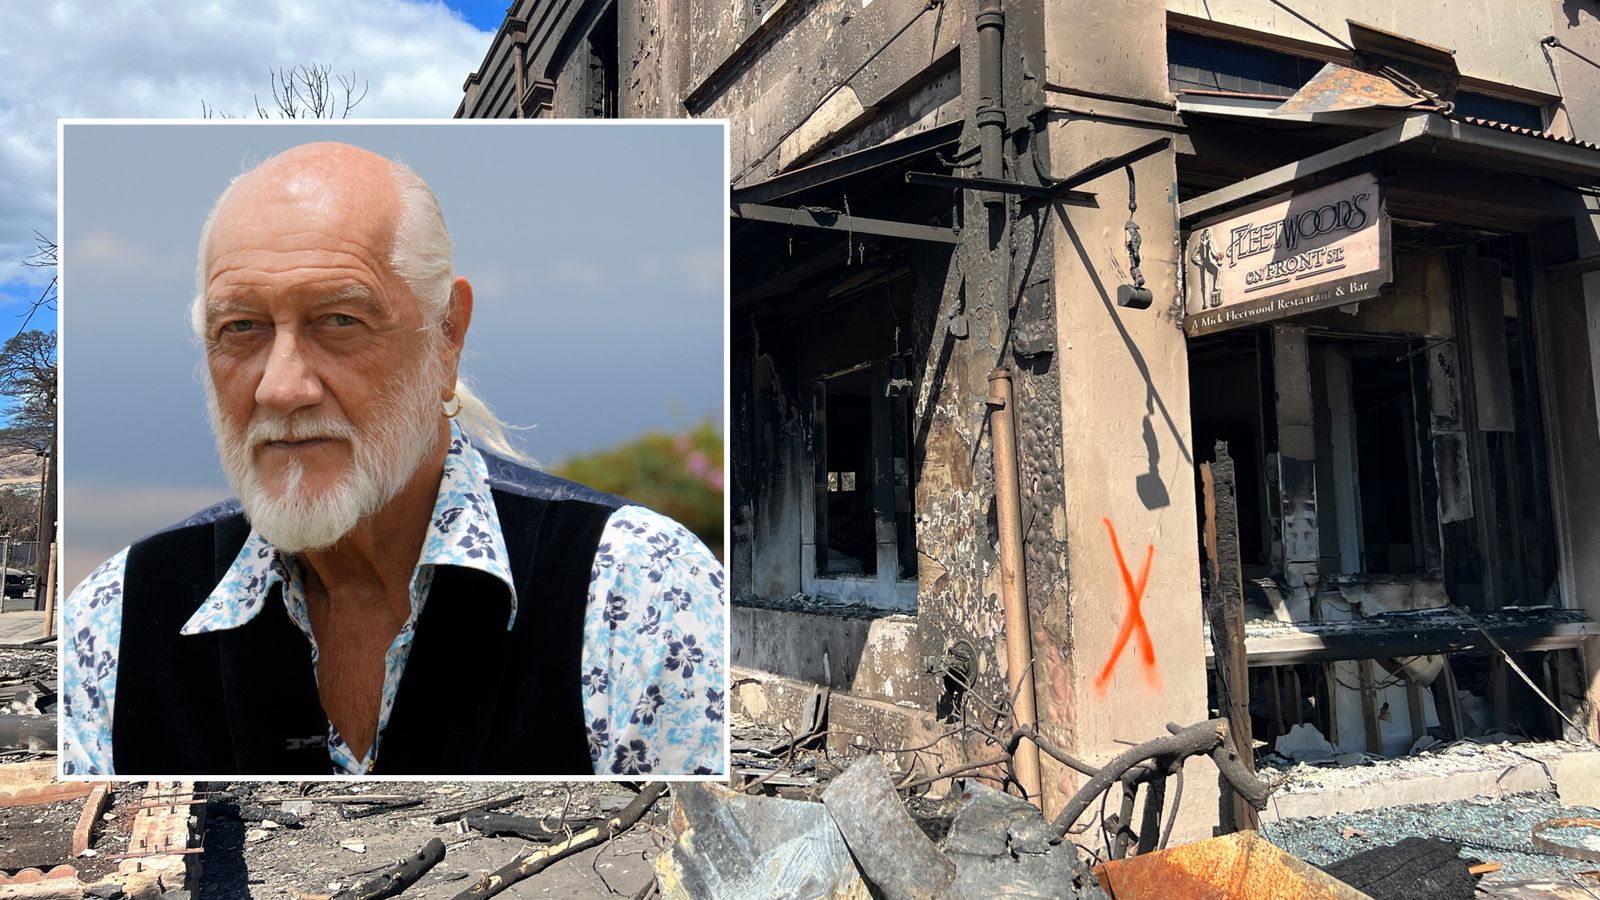 Hawaii wildfires: Mick Fleetwood's restaurant destroyed as he says situation on the ground is 'catastrophic'